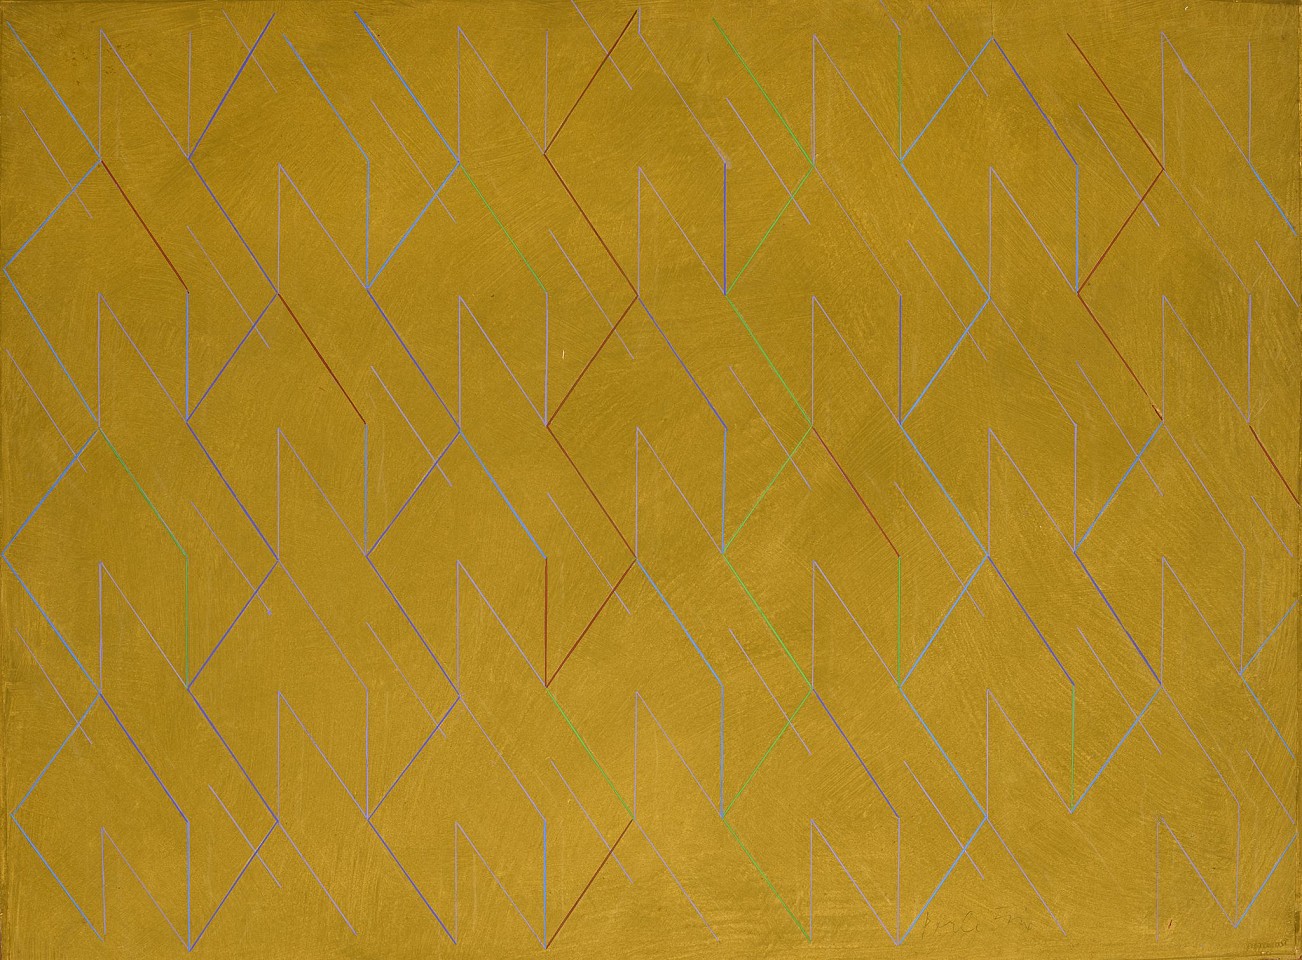 Perle Fine, An Accordment, c. 1973
Acrylic on Arches paper, 22 1/2 x 29 3/4 in. (57.1 x 75.6 cm)
FIN-00093